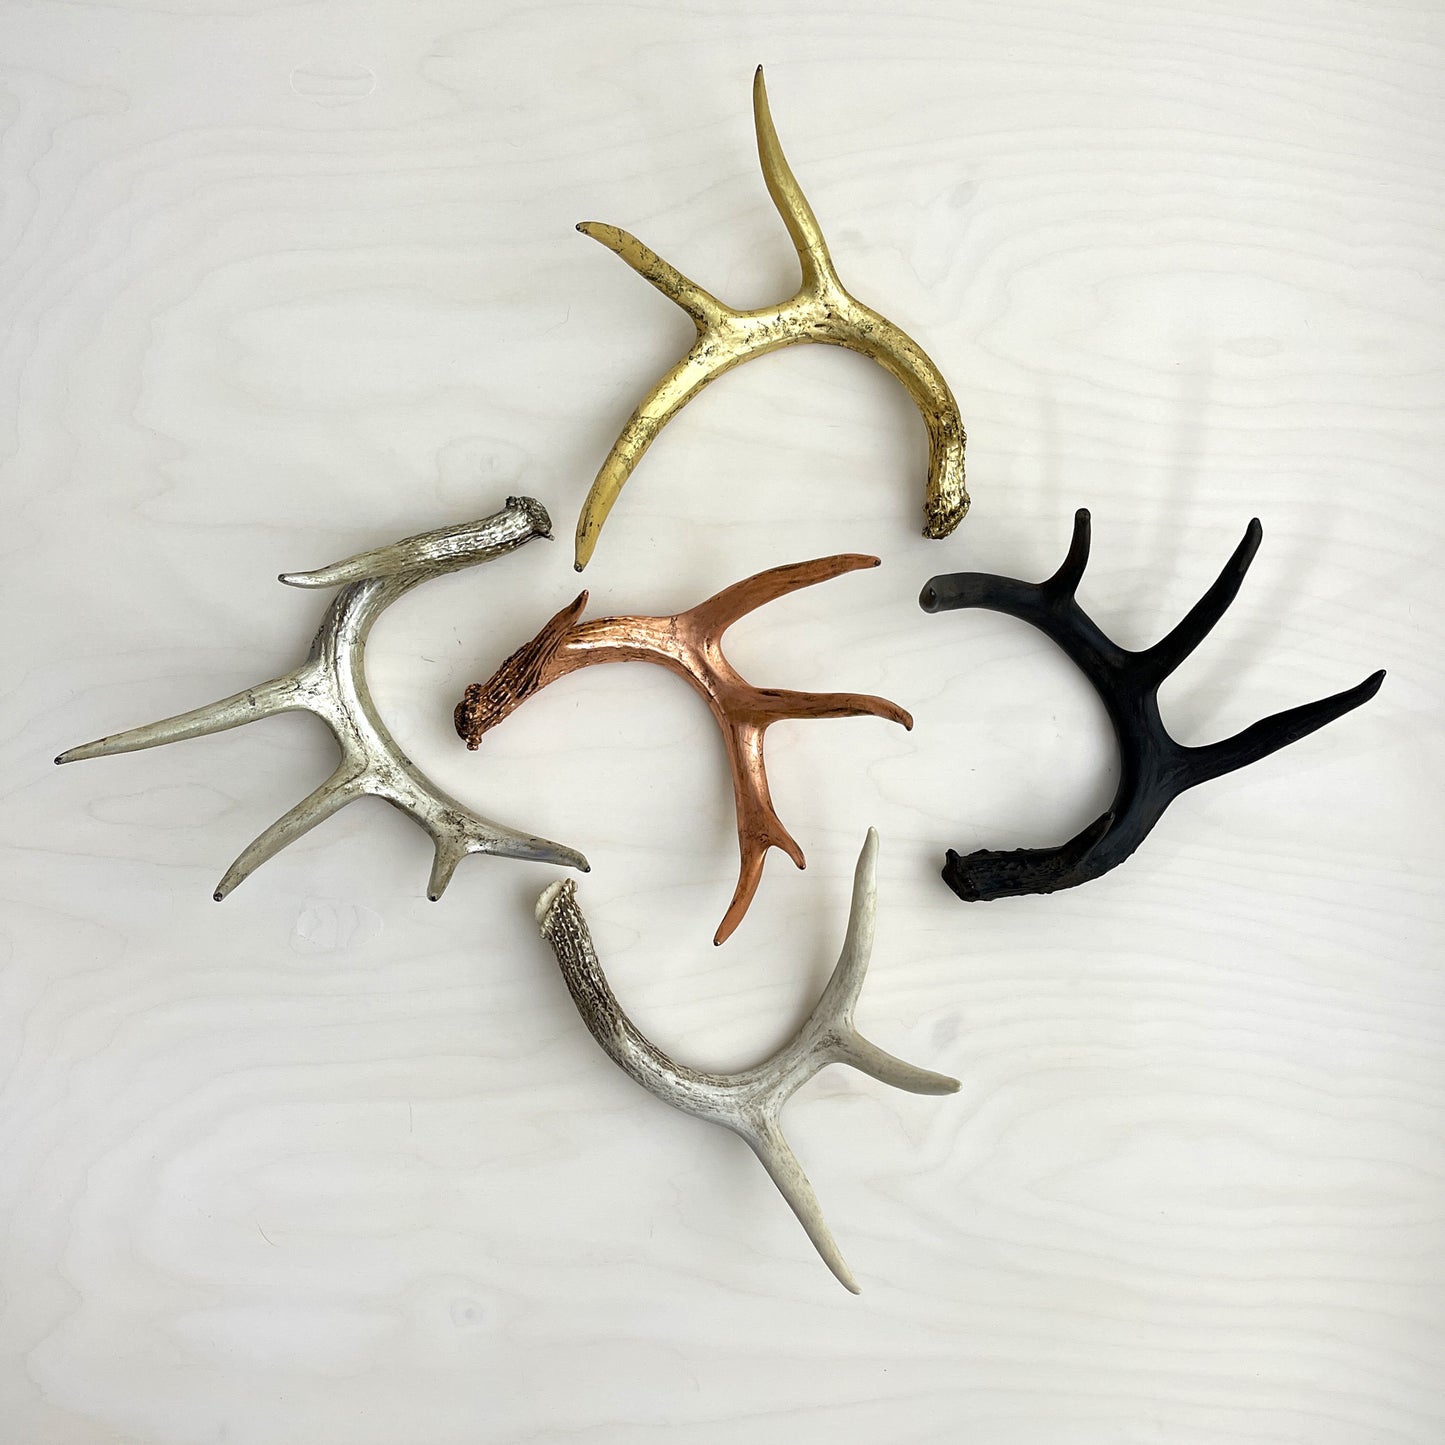 Antler Accents - Gilded